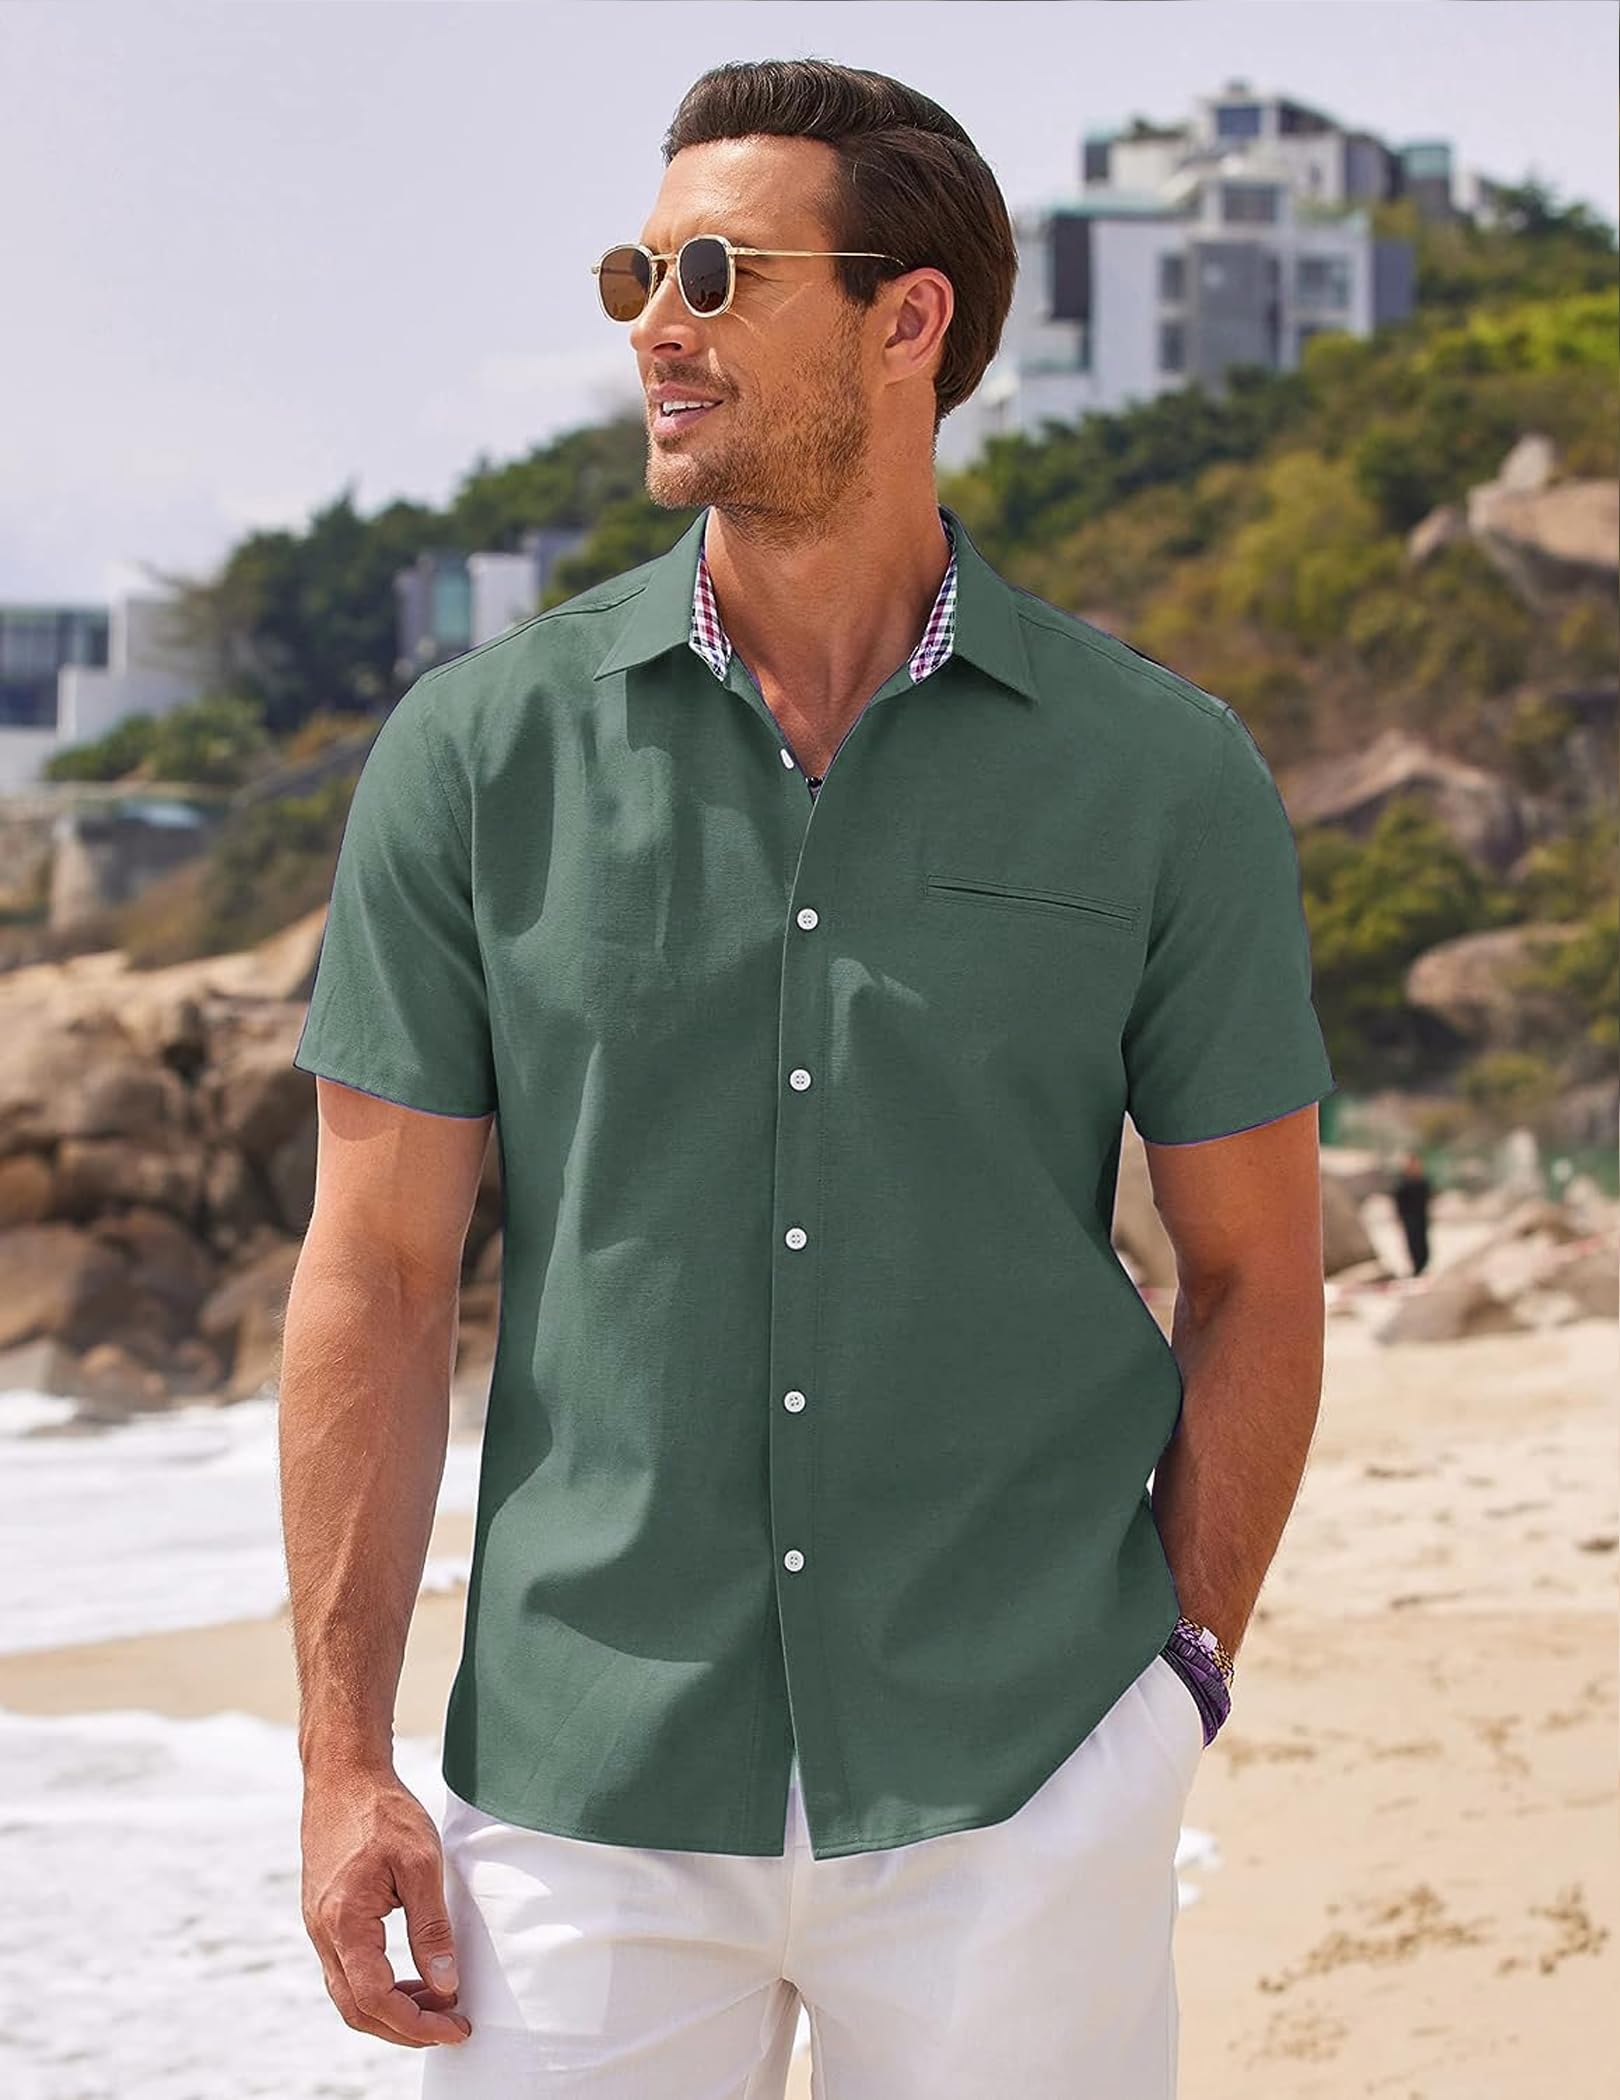 Men's short sleeve dress shirts are versatile wardrobe staples that offer both style and comfort for various occasions.